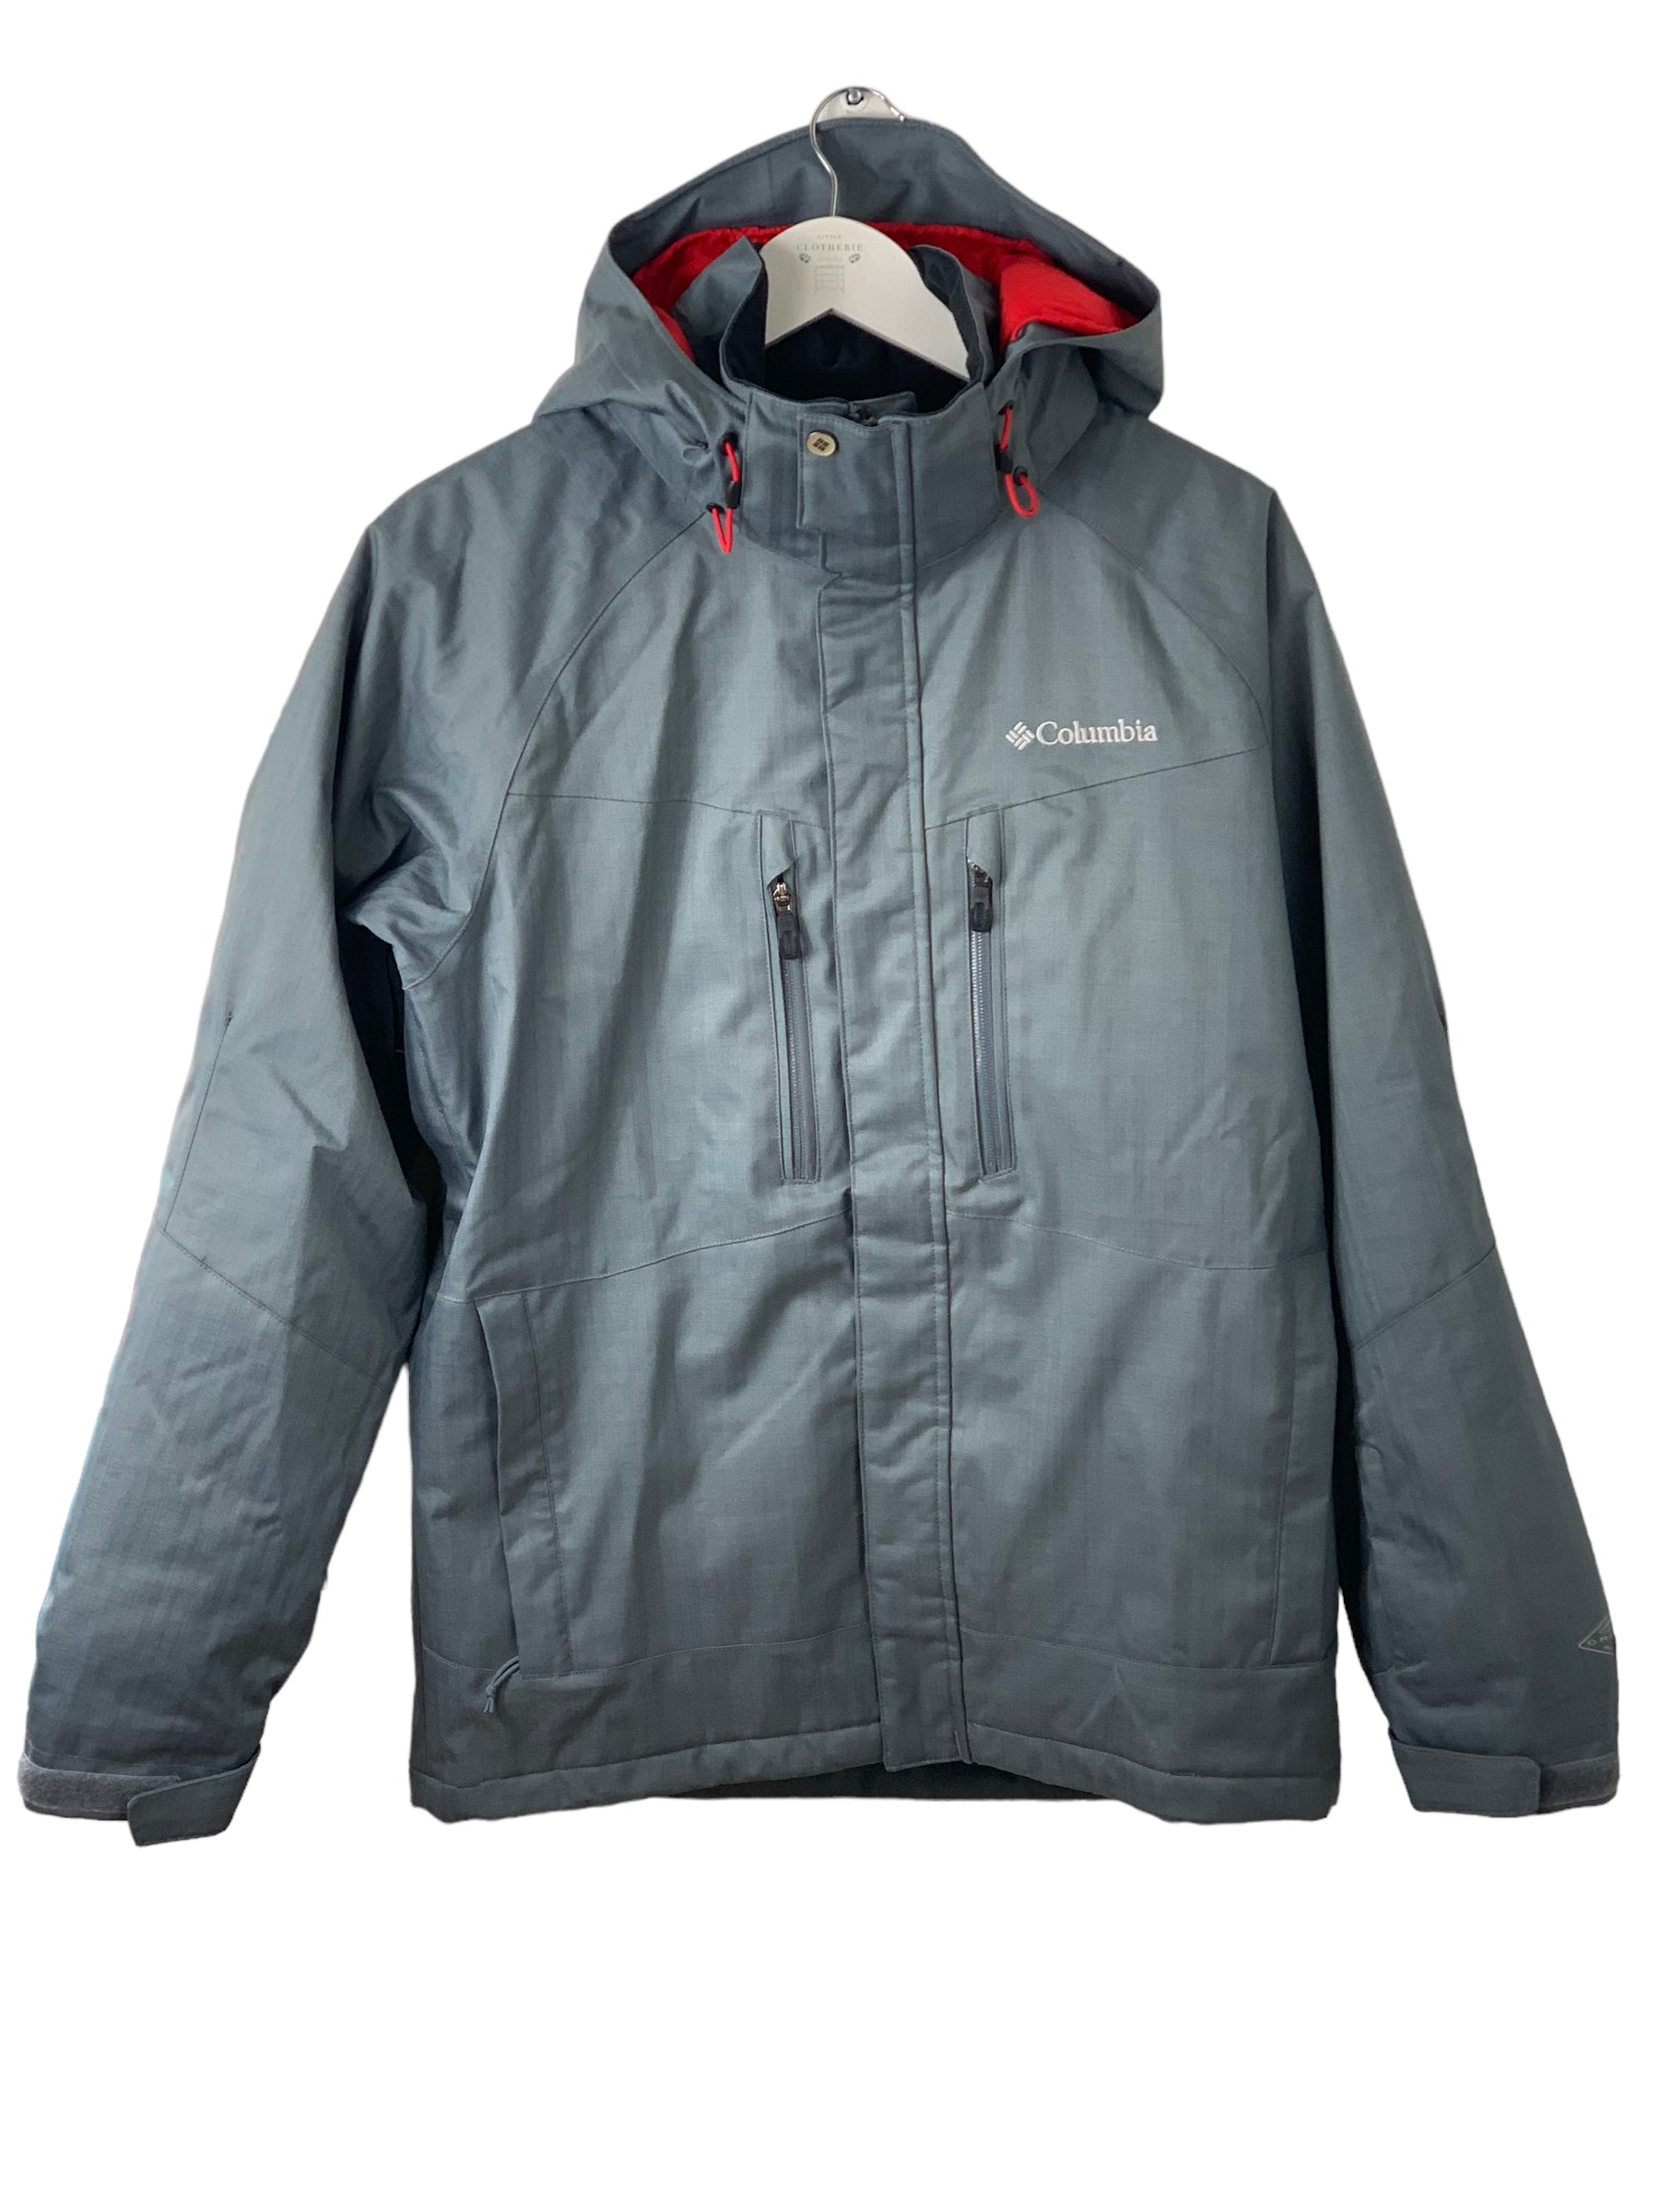 Veste ski Columbia HOMME Taille S - Little.Clotherie.Family